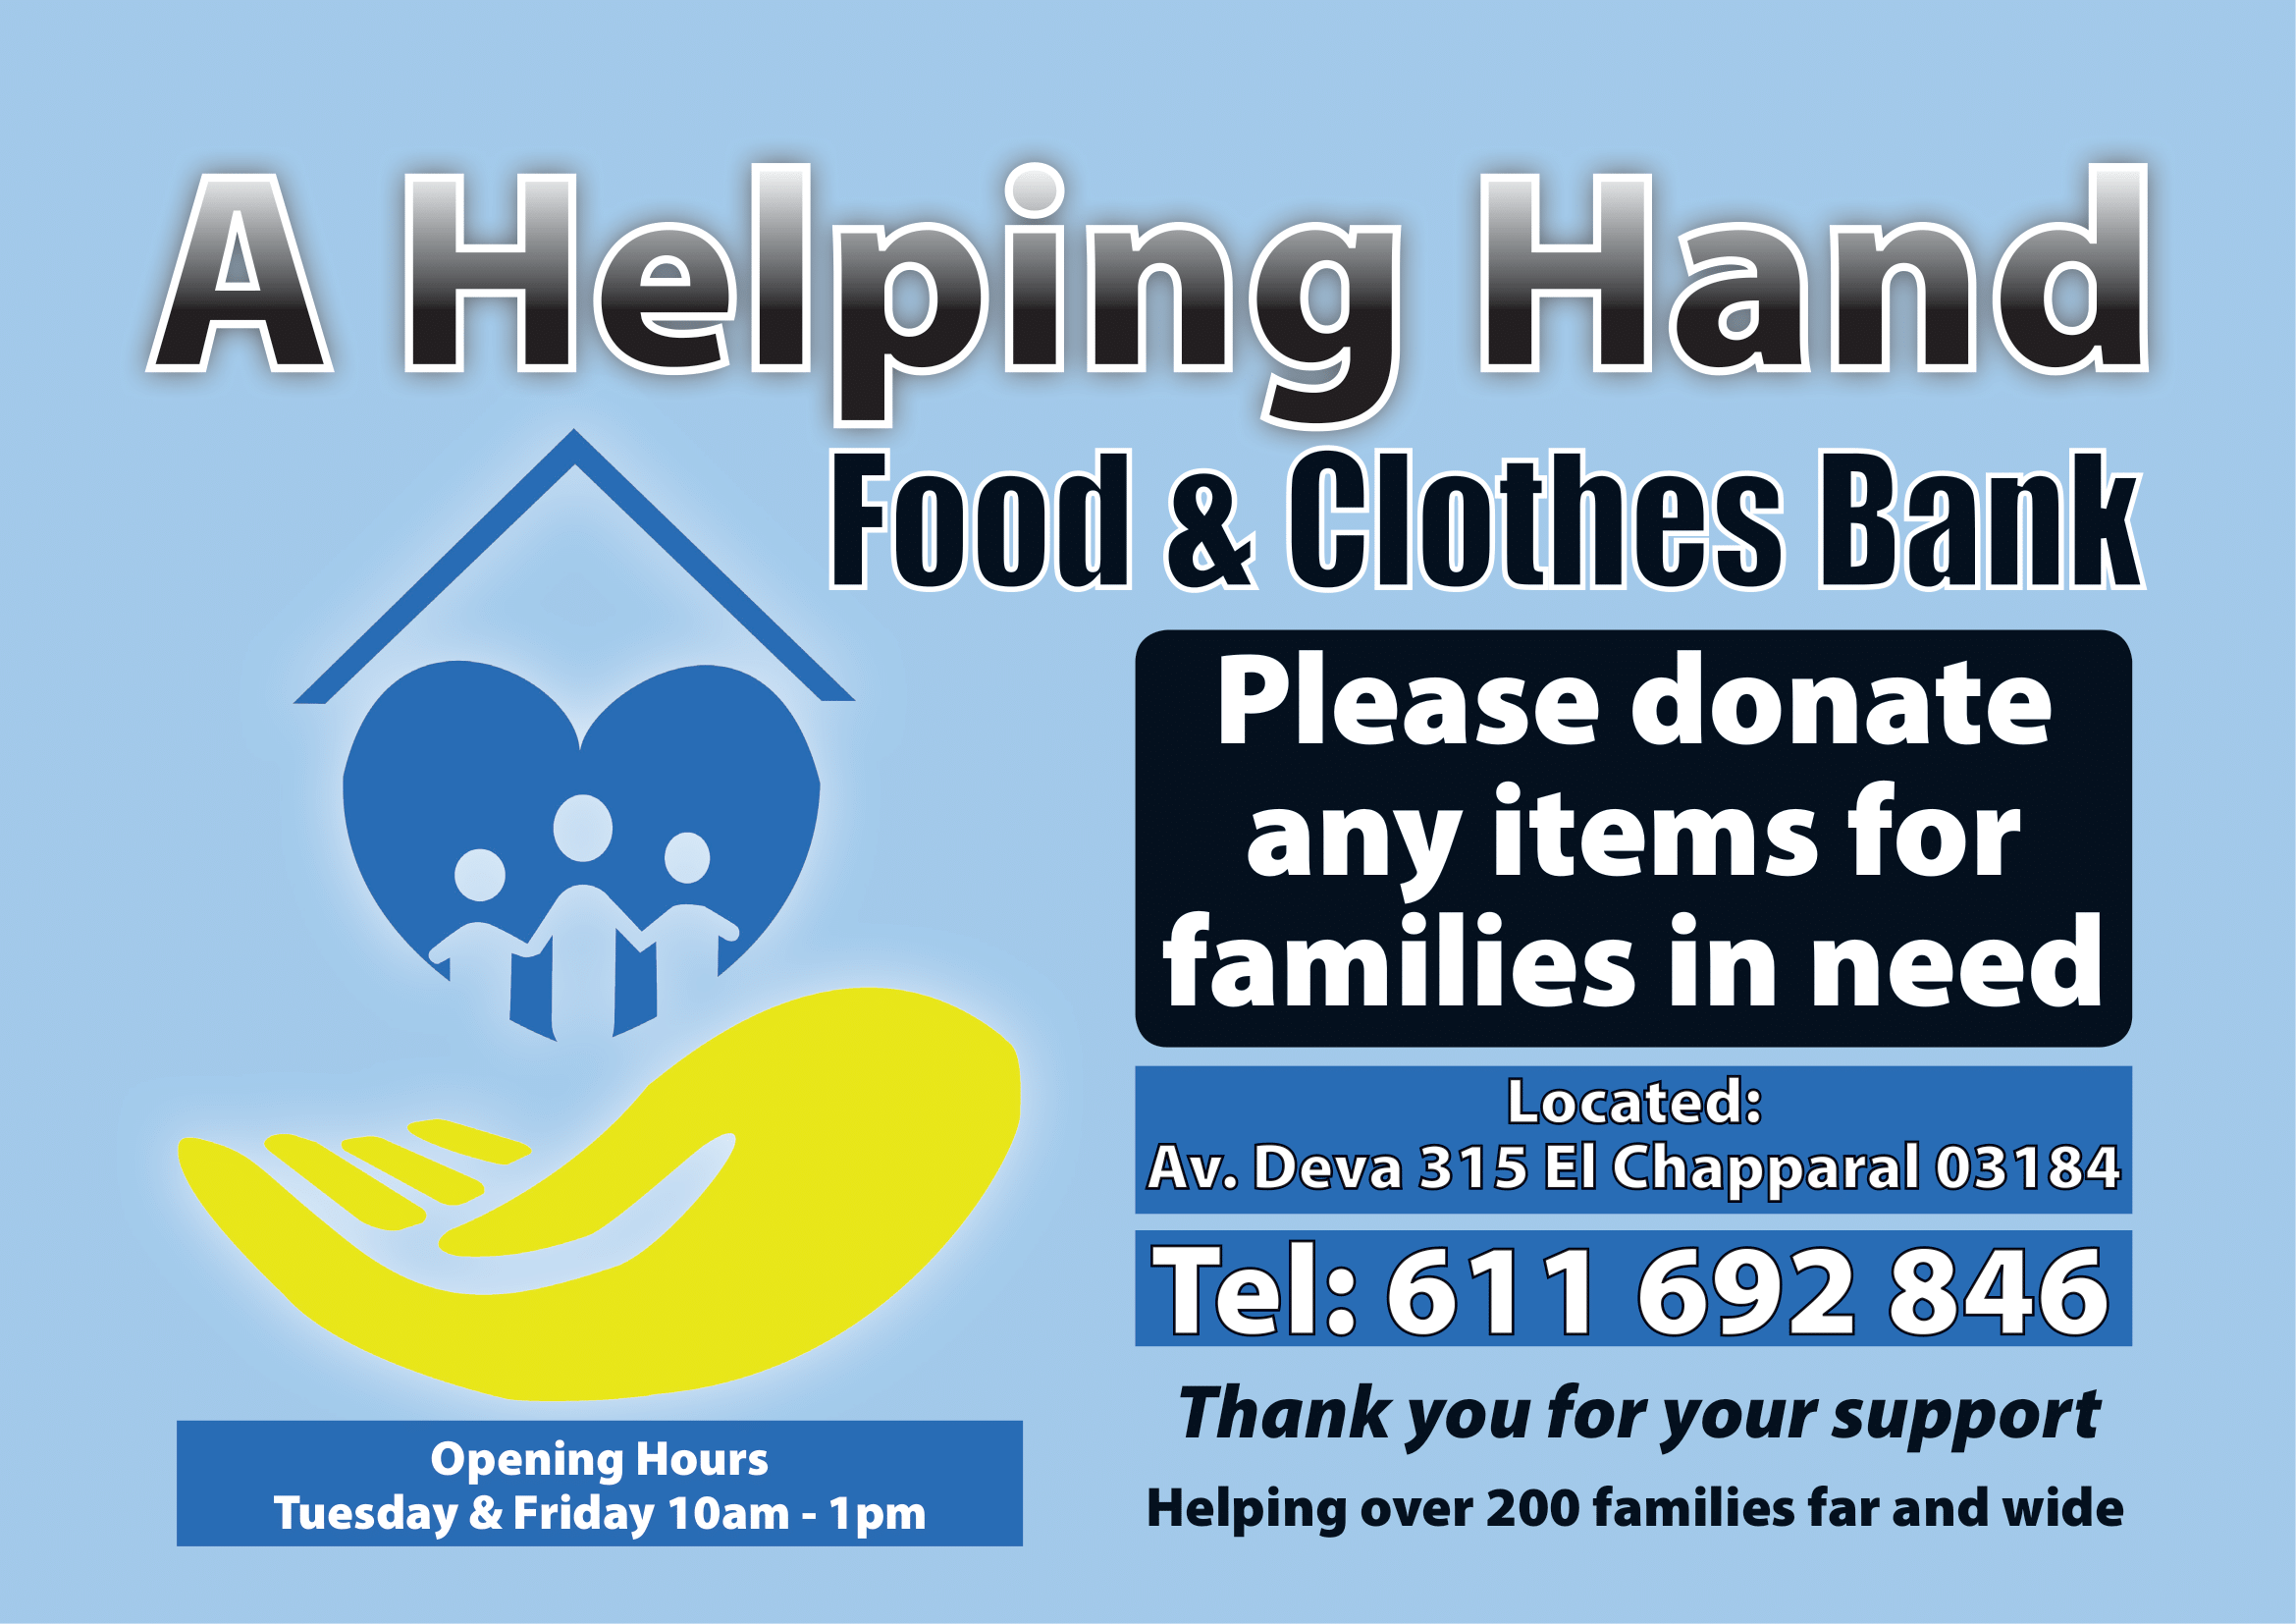 A Helping Hand - Food & Clothes bank charity - details image